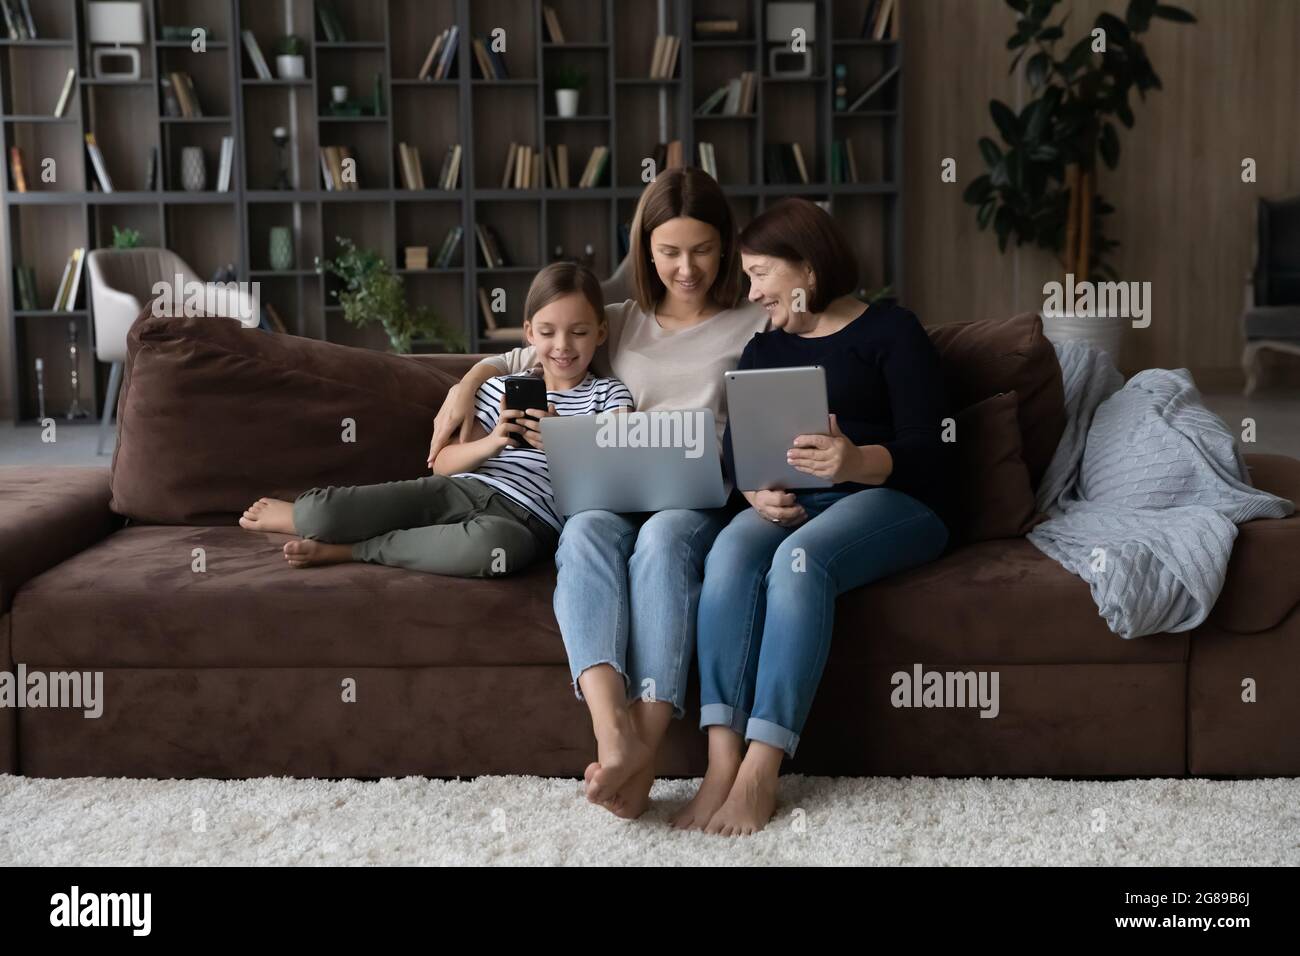 Three female generations of family relaxing on couch Stock Photo